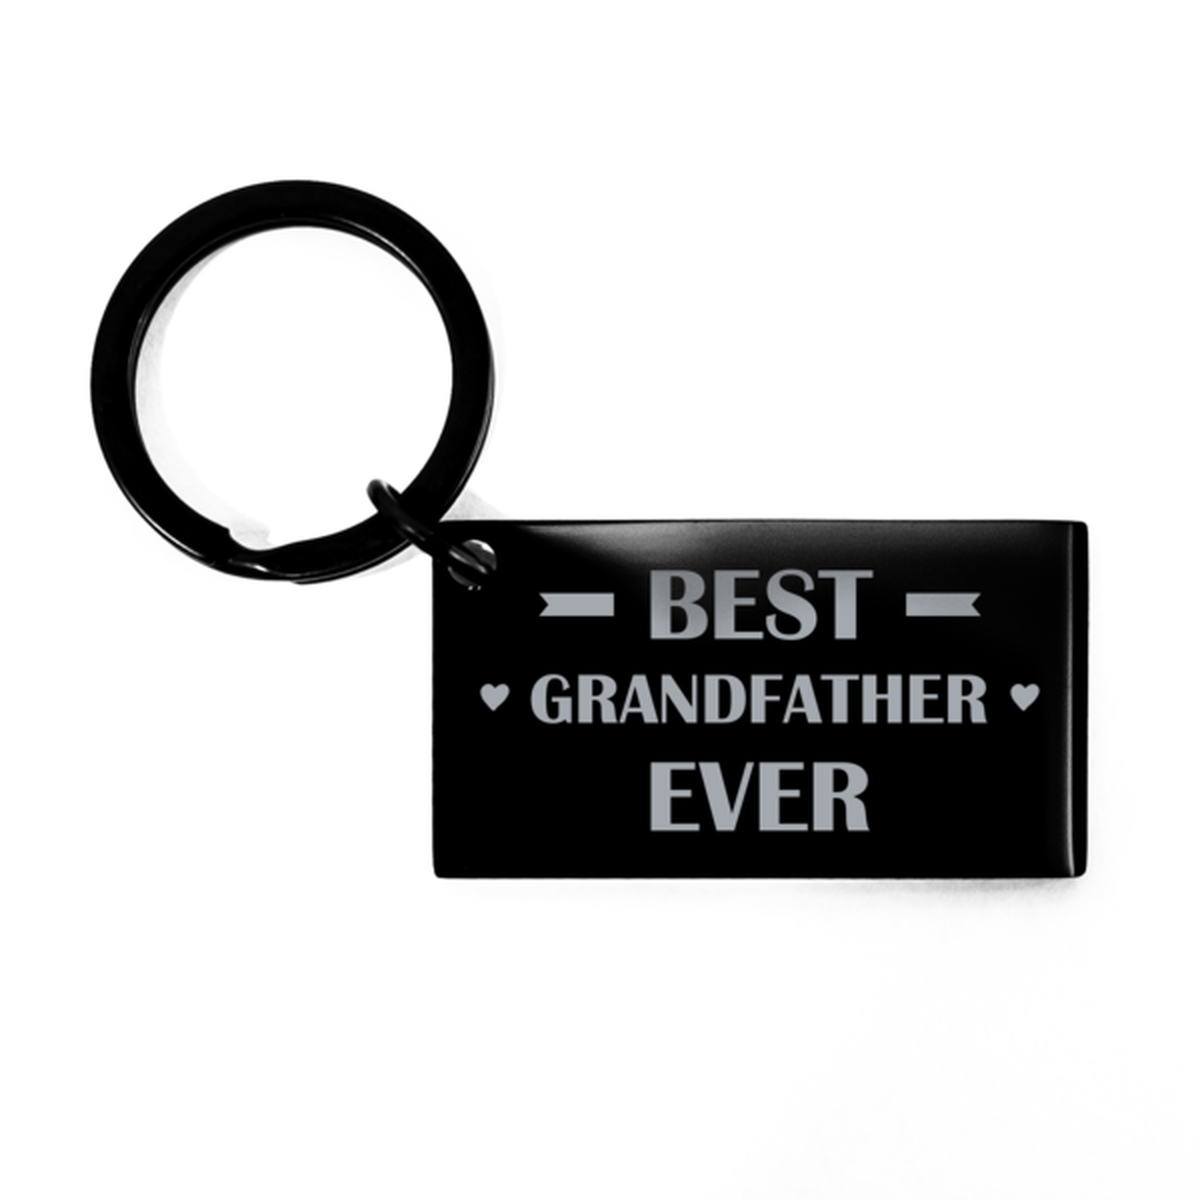 Best Grandfather Ever Grandfather Gifts, Funny Black Keychain For Grandfather, Birthday Engraved Keyring Presents For Men